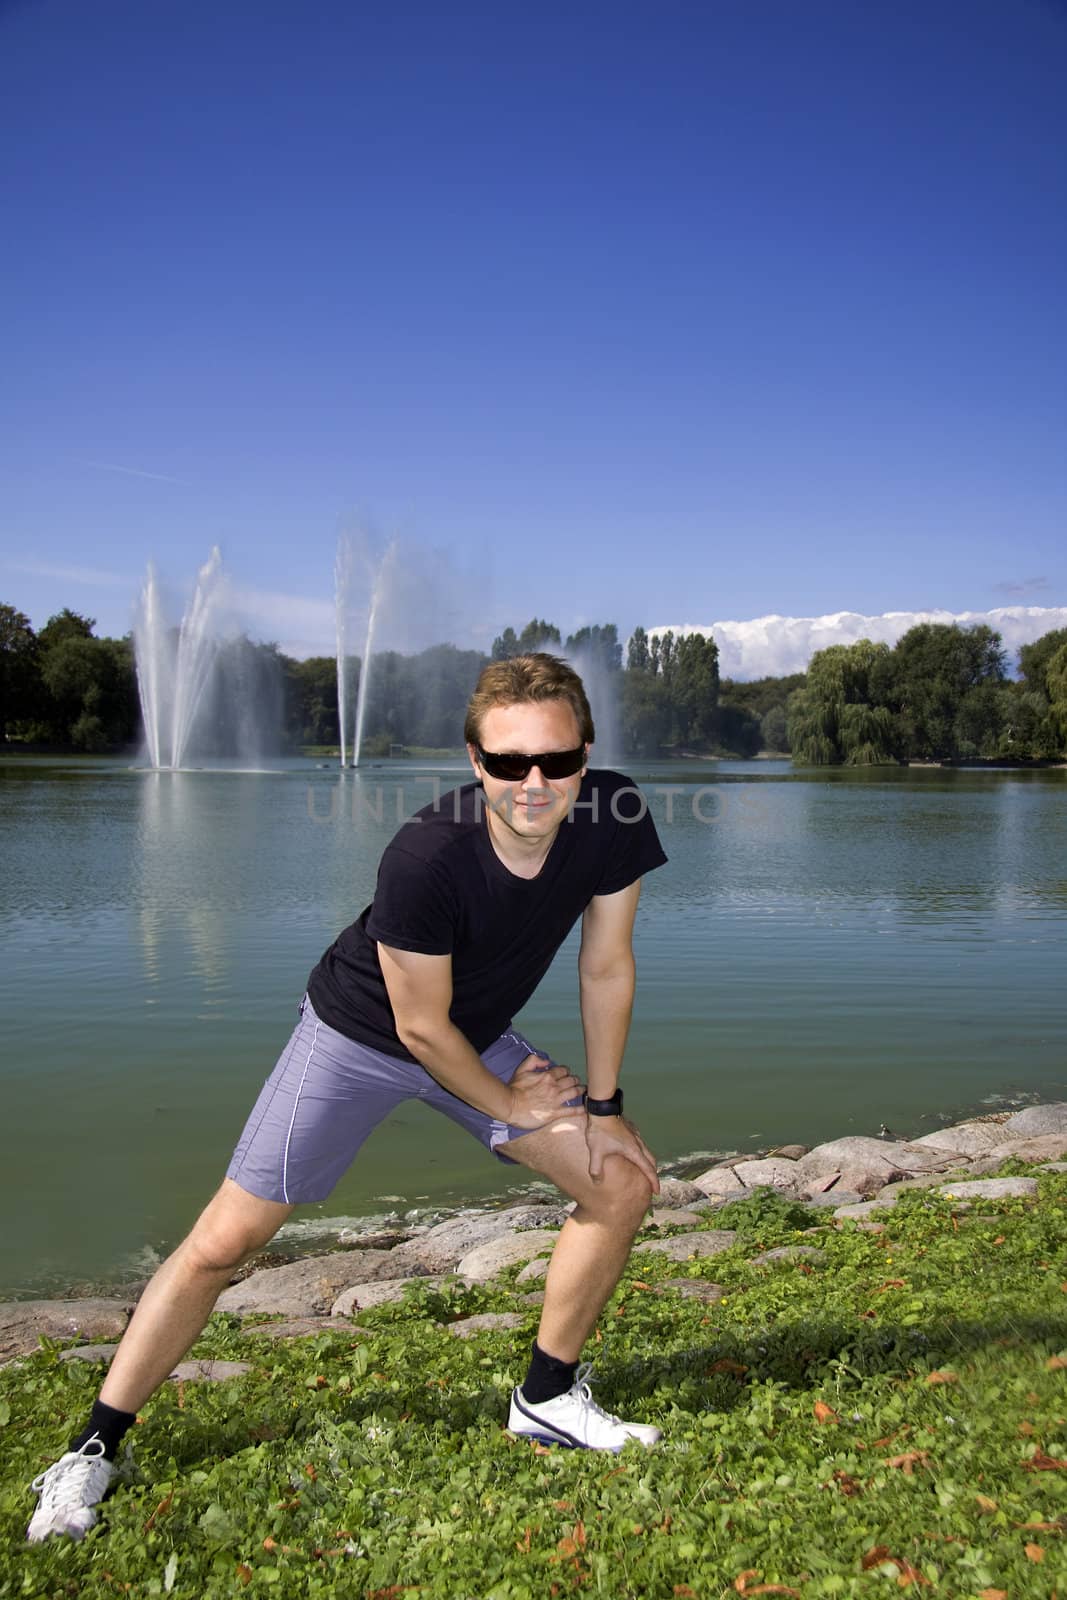 Man working out in a beautiful park by a lake